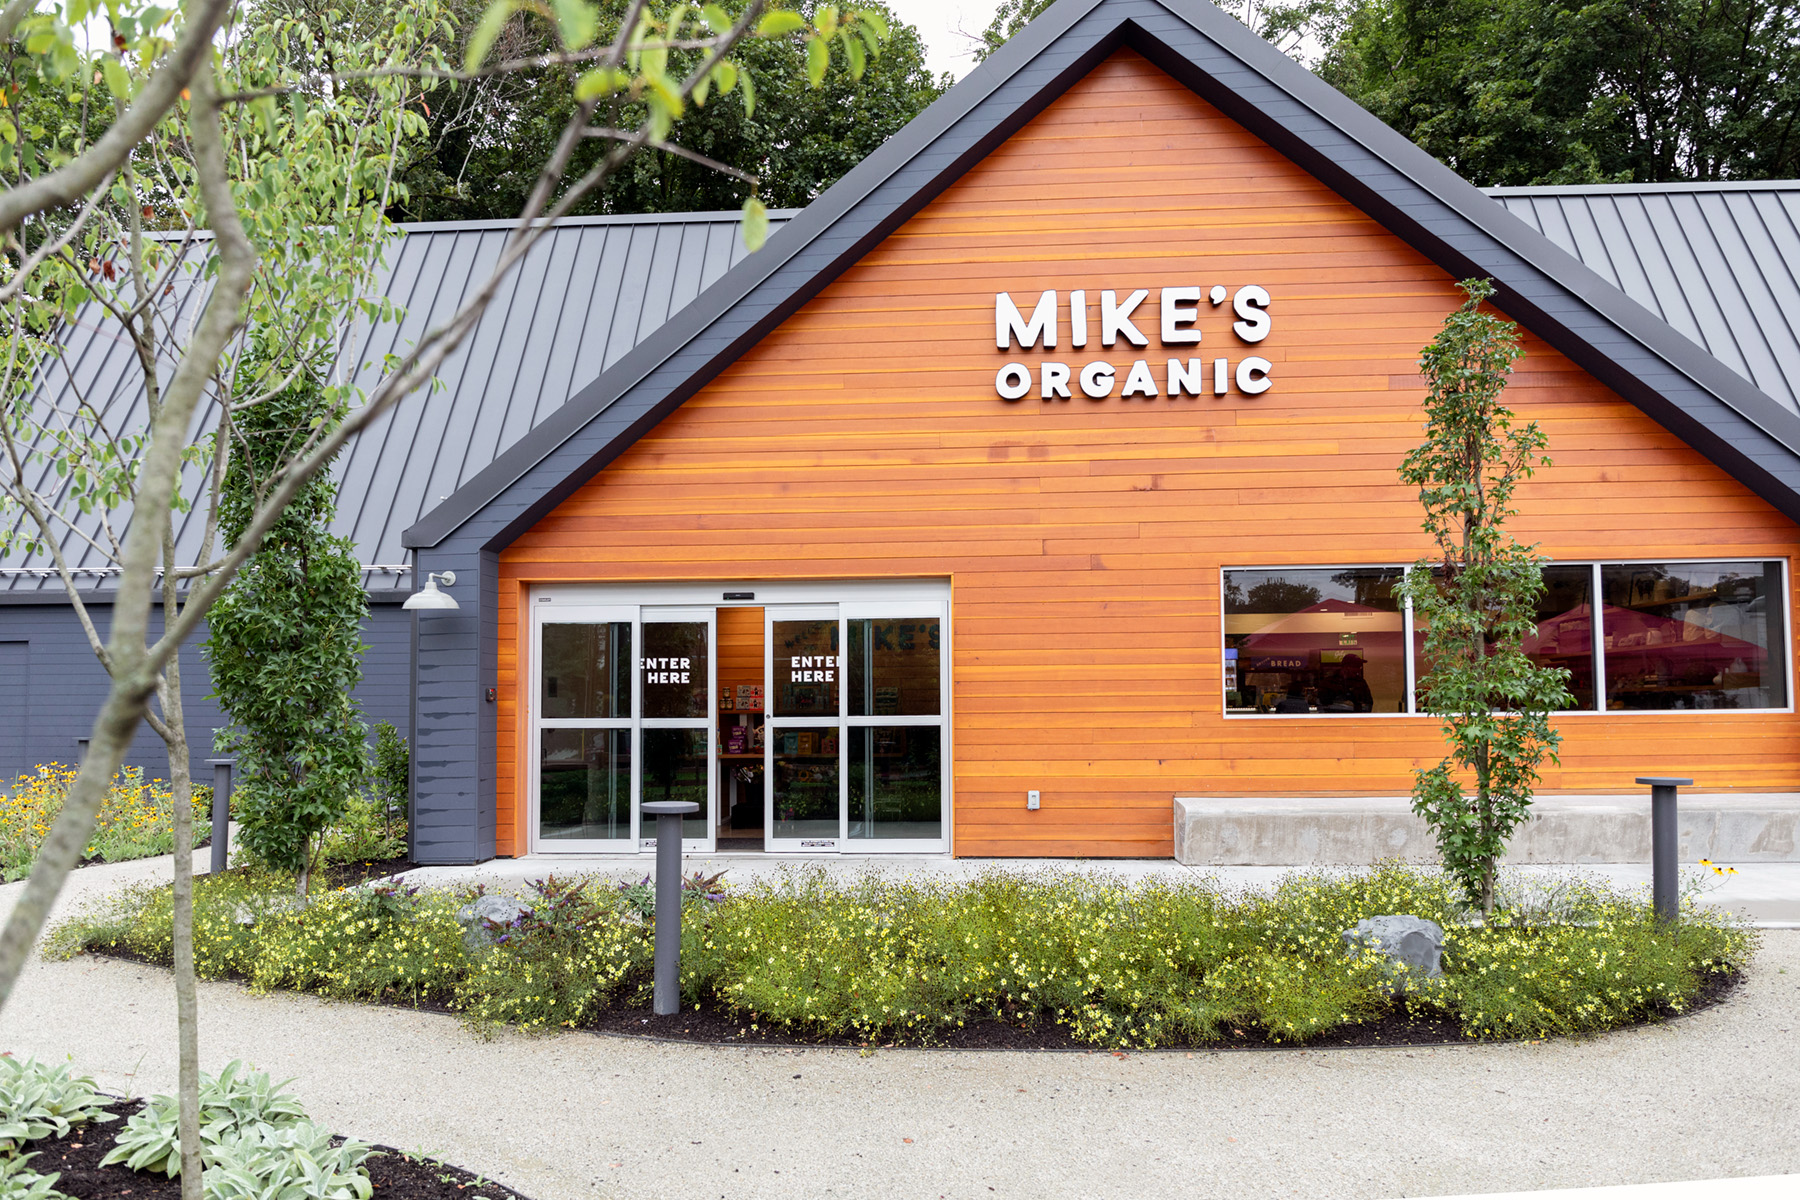 Mike’s Organic occupies a freestanding building that was previously an IHOP that many Cos Cob residents have fond memories of visiting